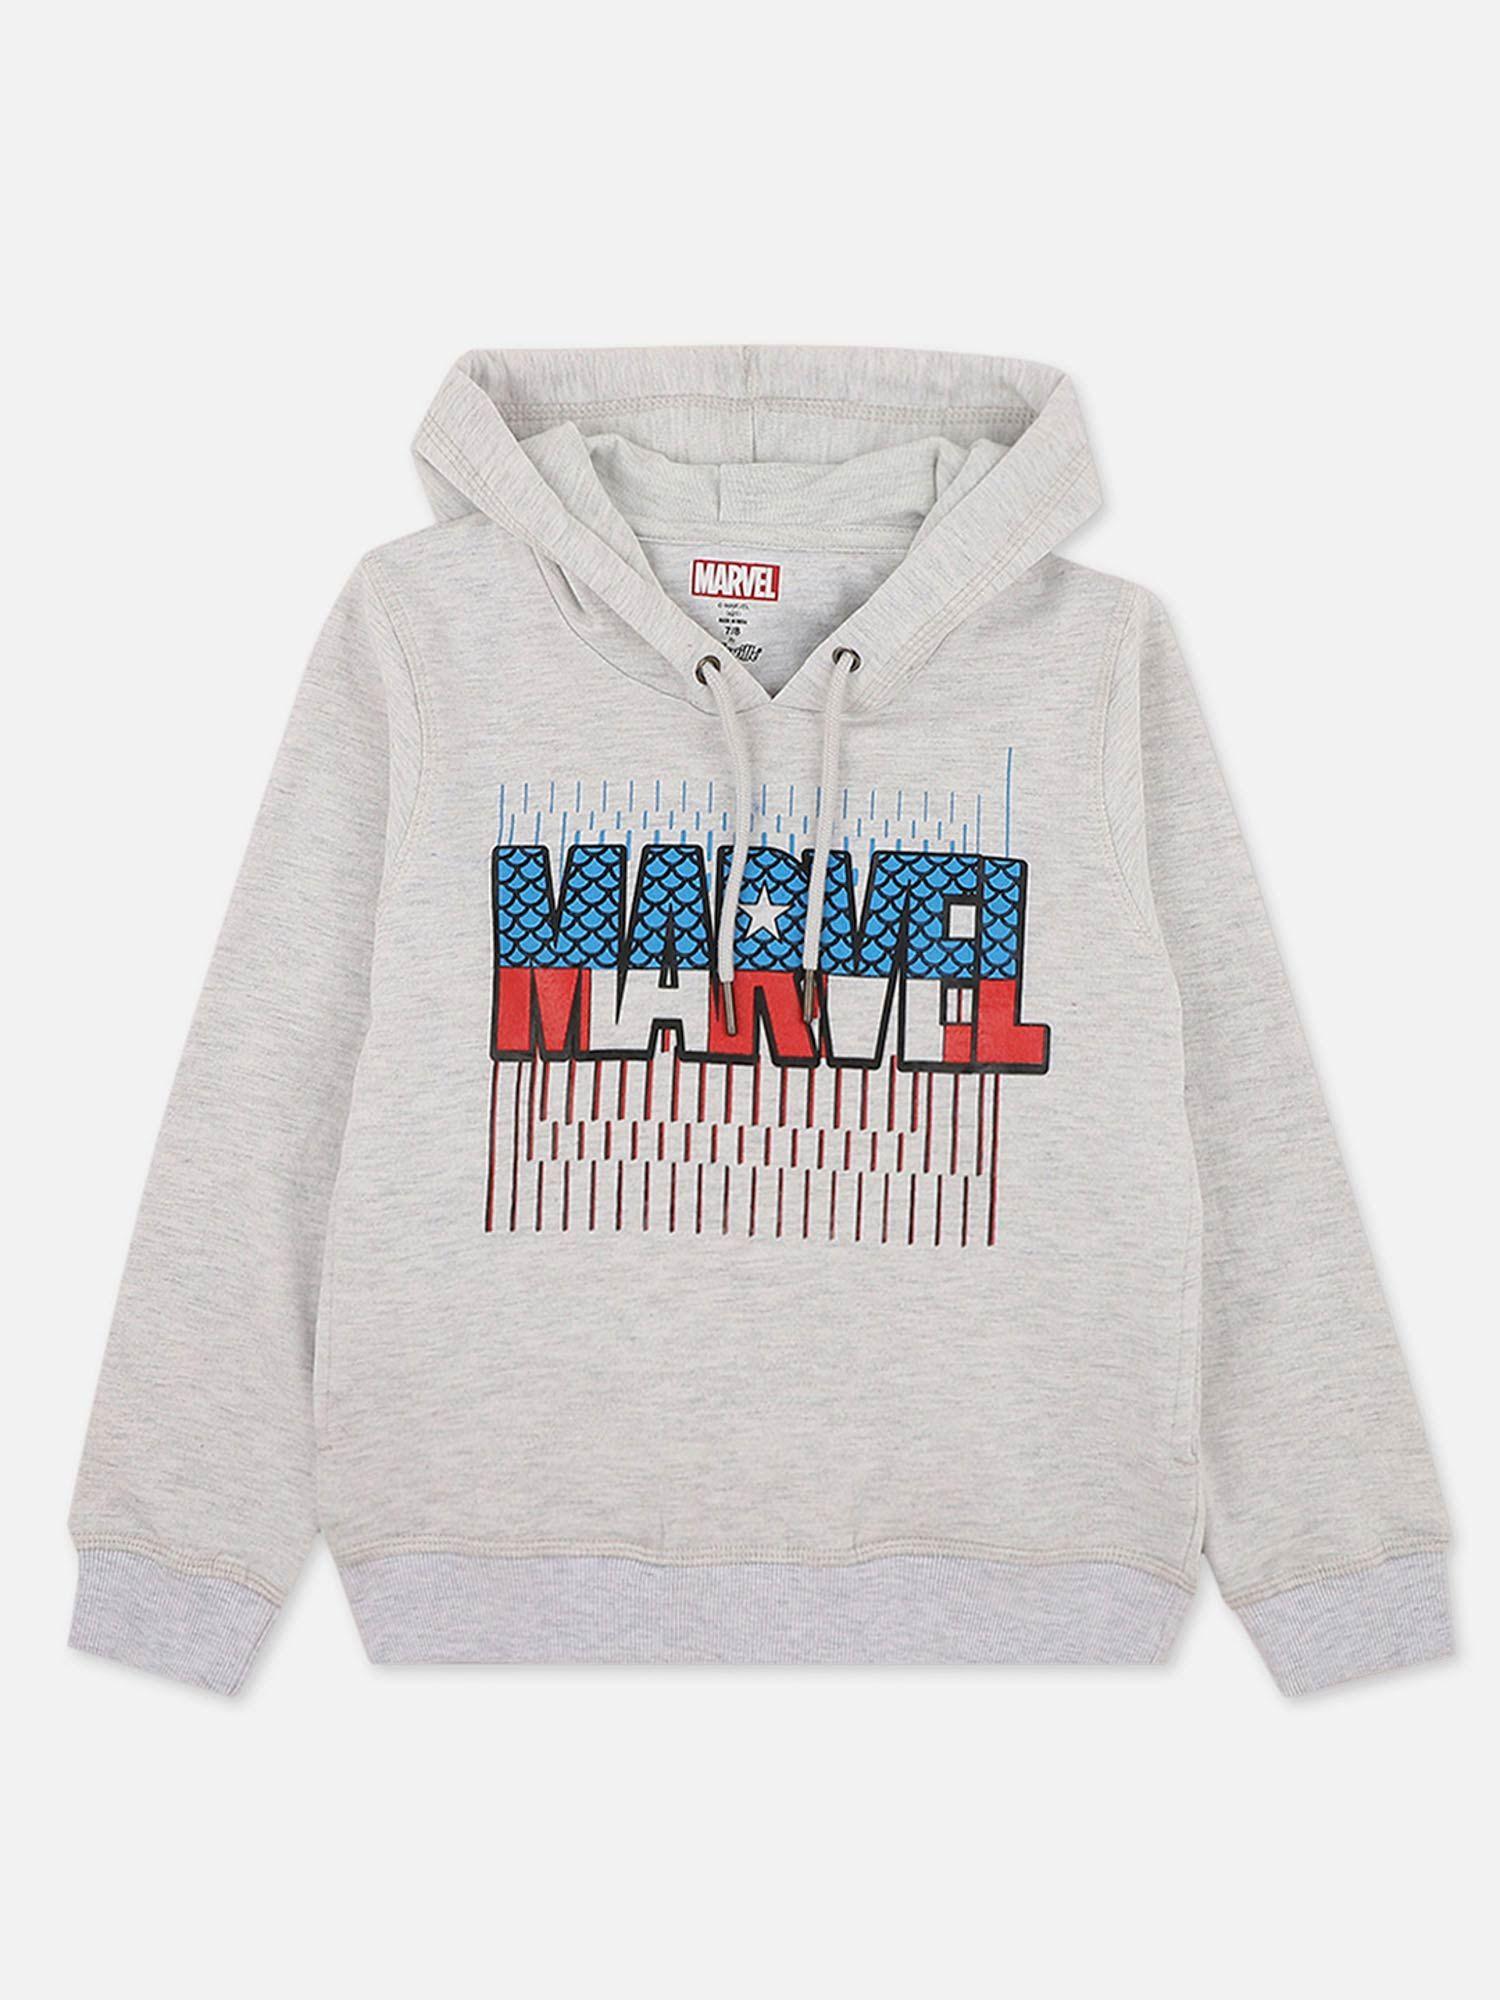 avengers featured hoodie for boys